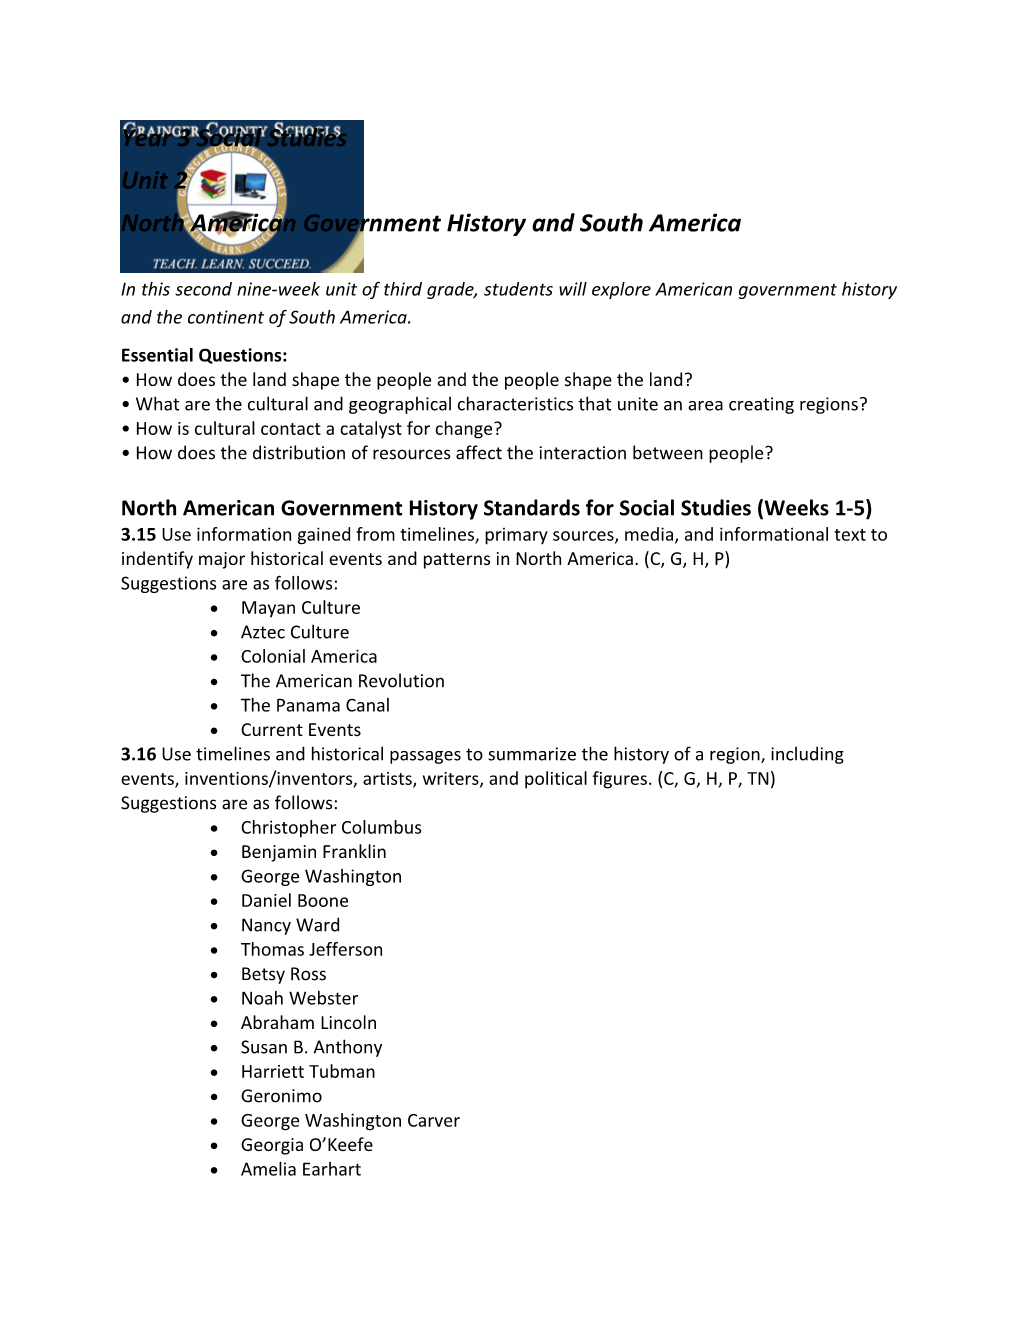 North American Government History and South America